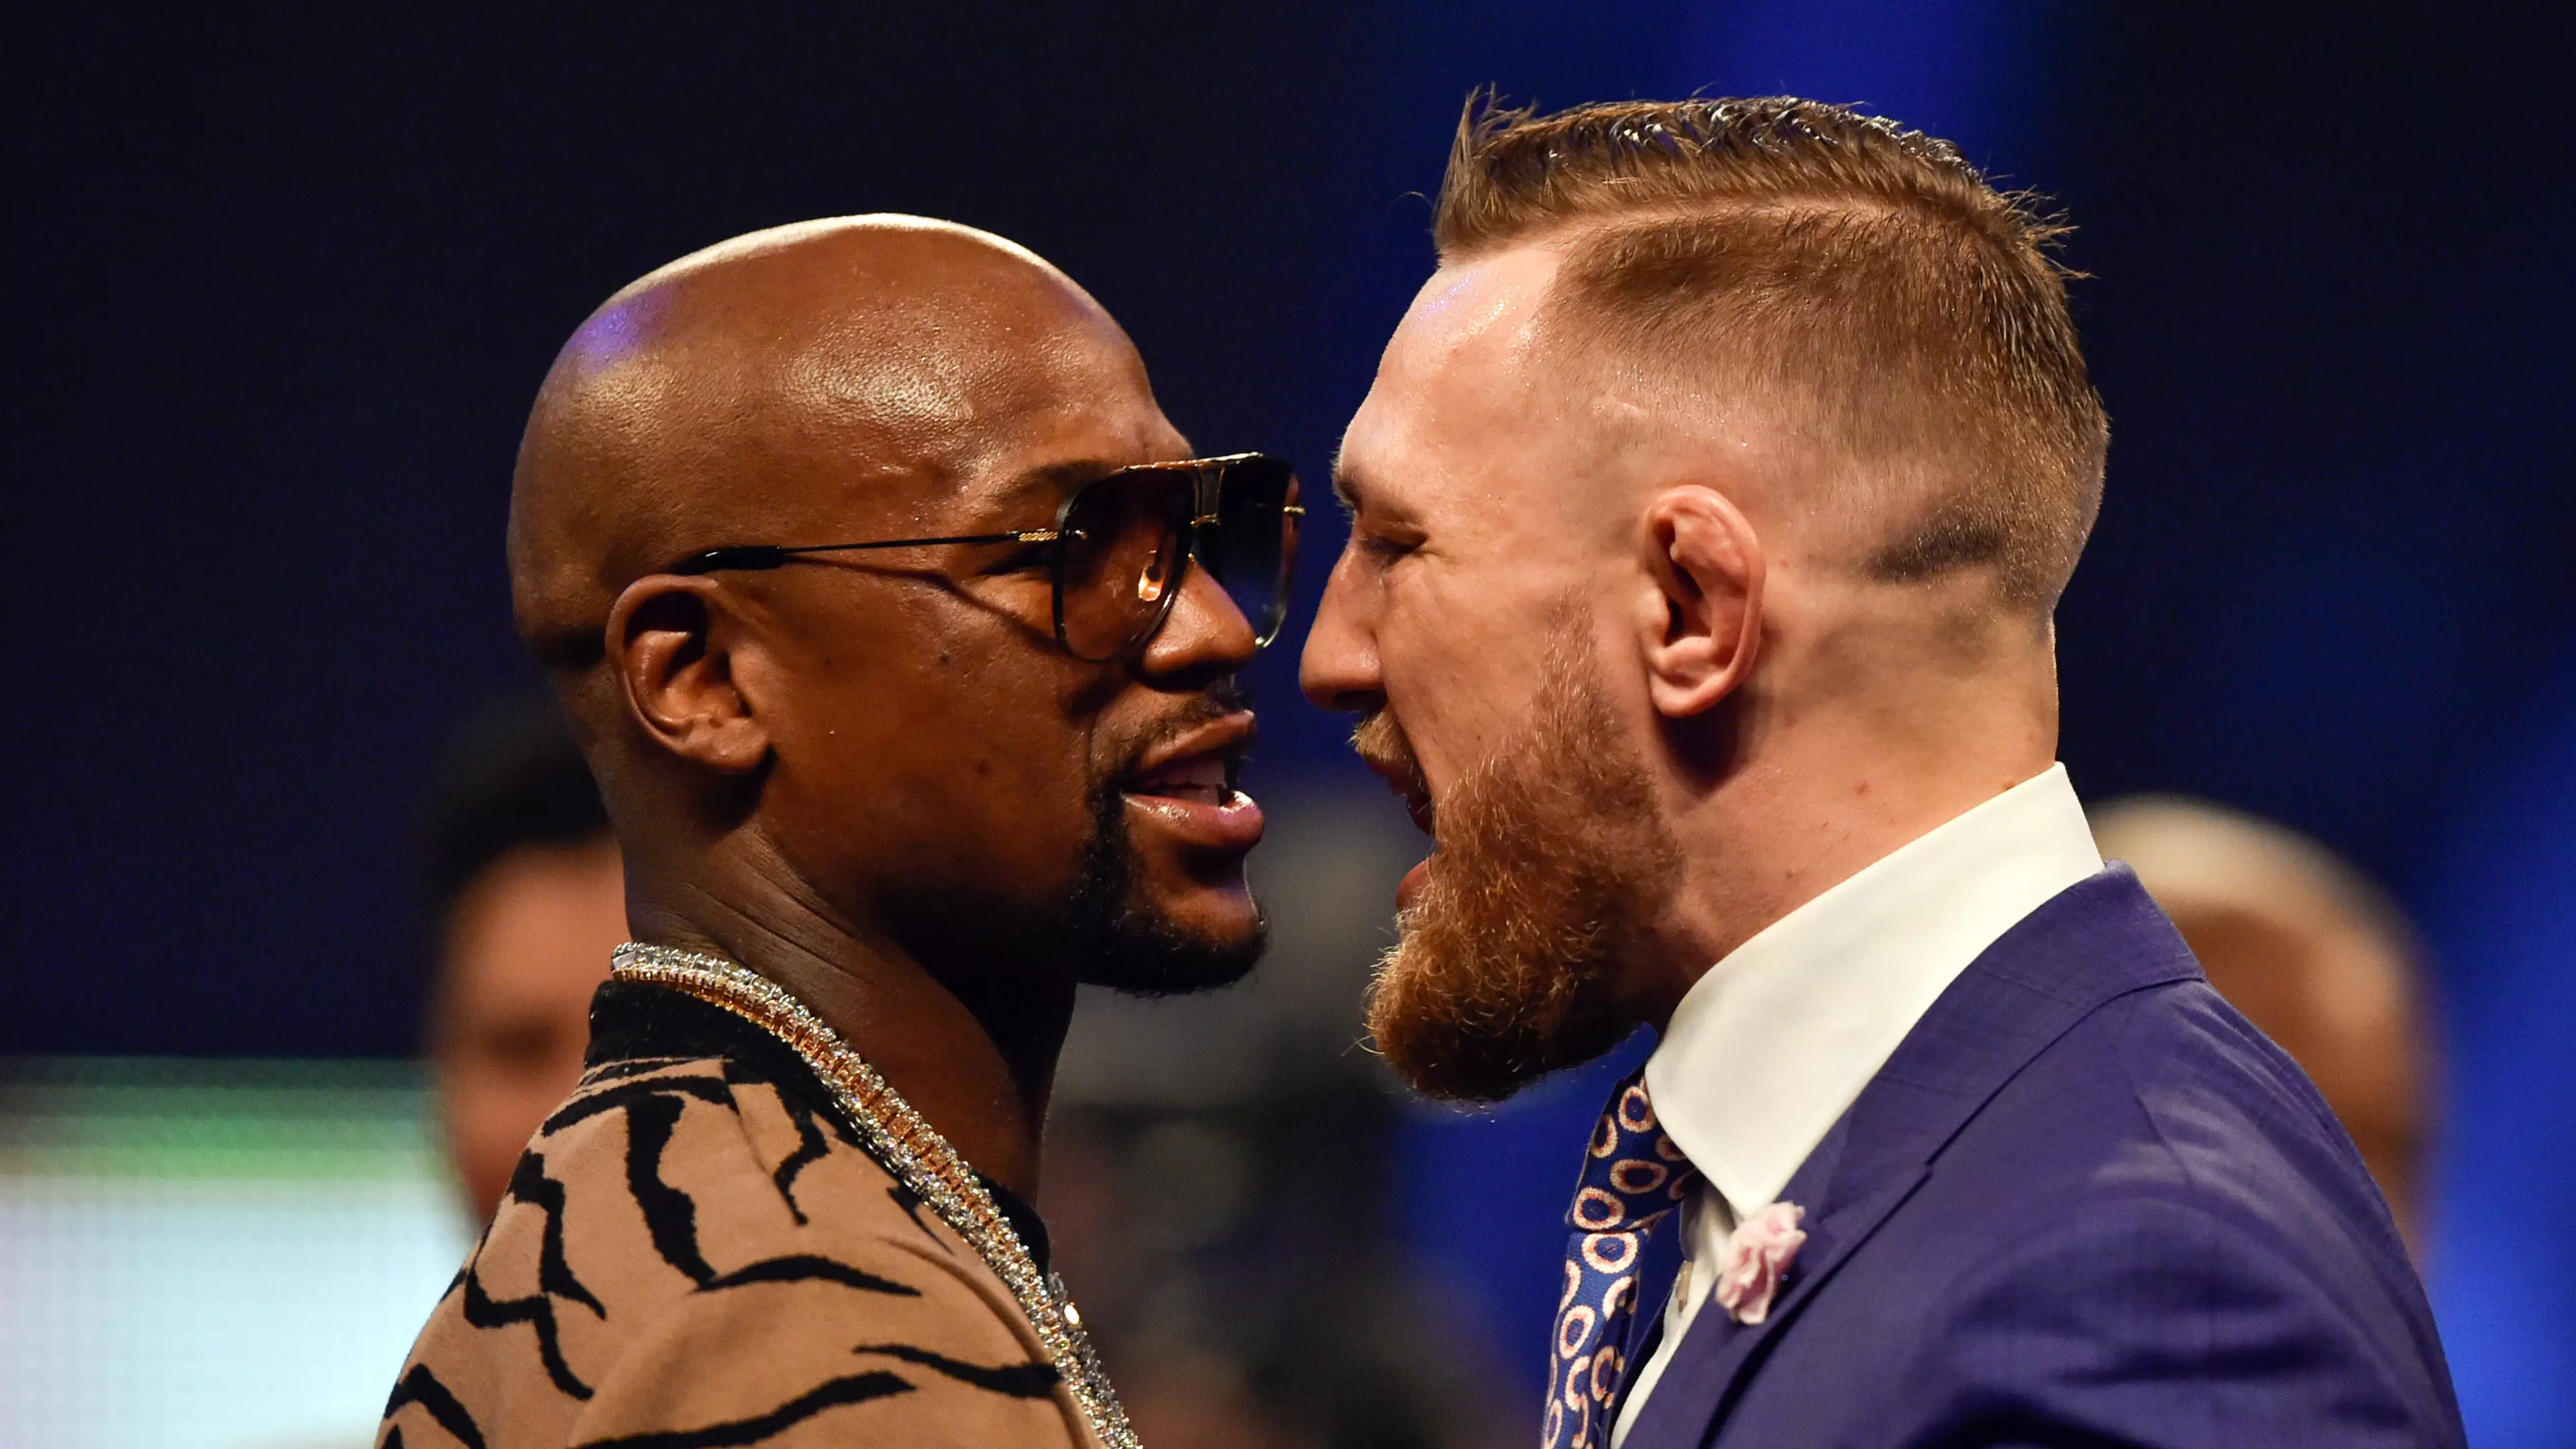 Tickets For Mayweather vs McGregor Are Struggling To Sell For A Very Good Reason